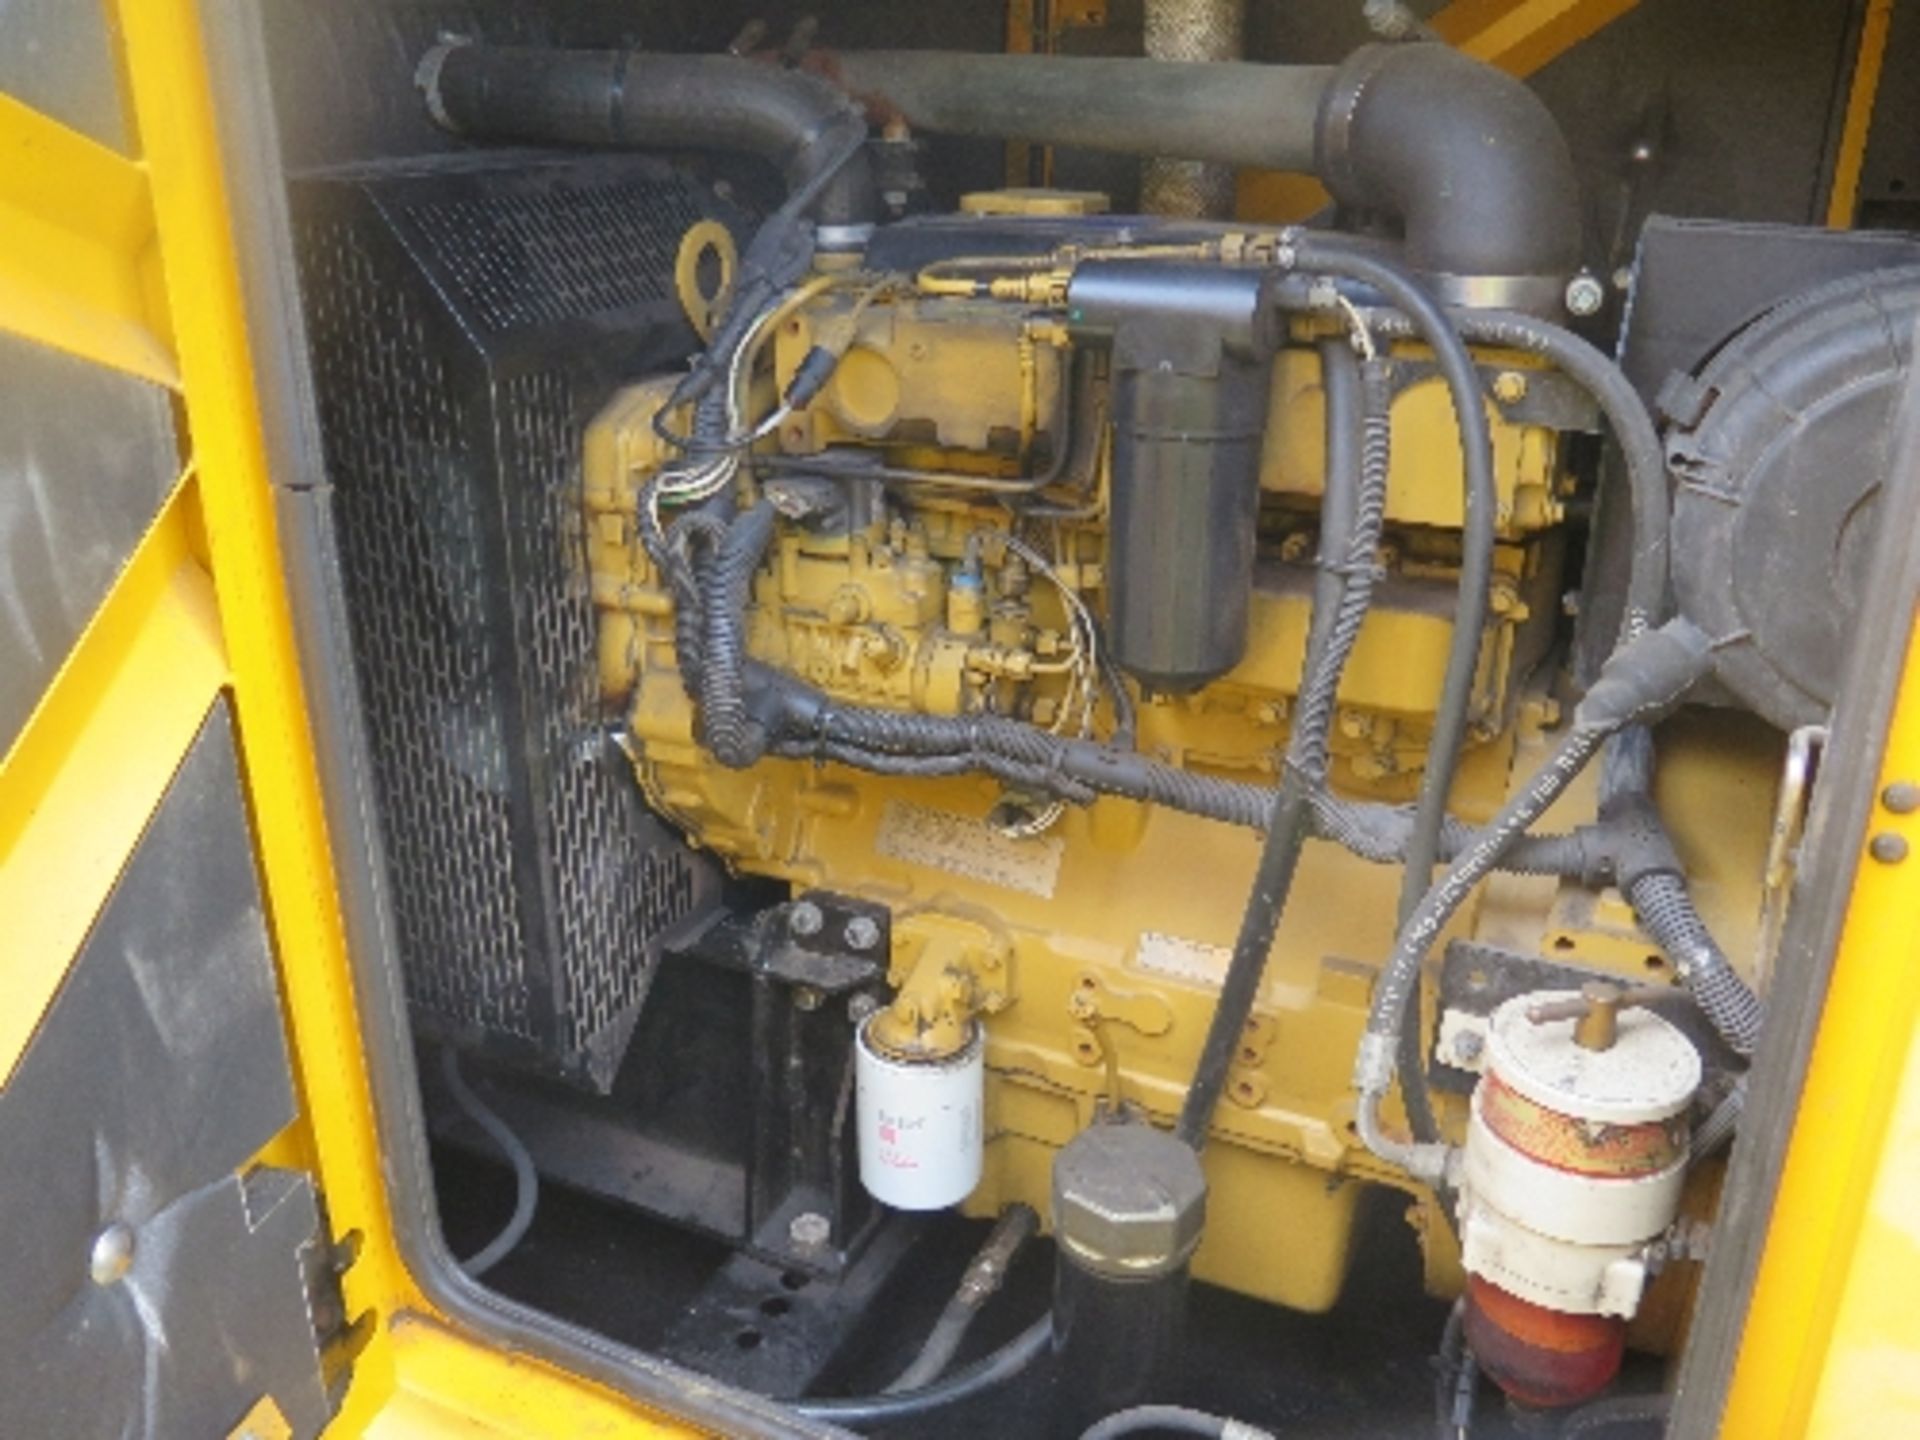 Caterpillar XQE80 generator 17821 hrs 5003858
PERKINS POWER - RUNS AND MAKES POWER
ALL LOTS are - Image 3 of 6